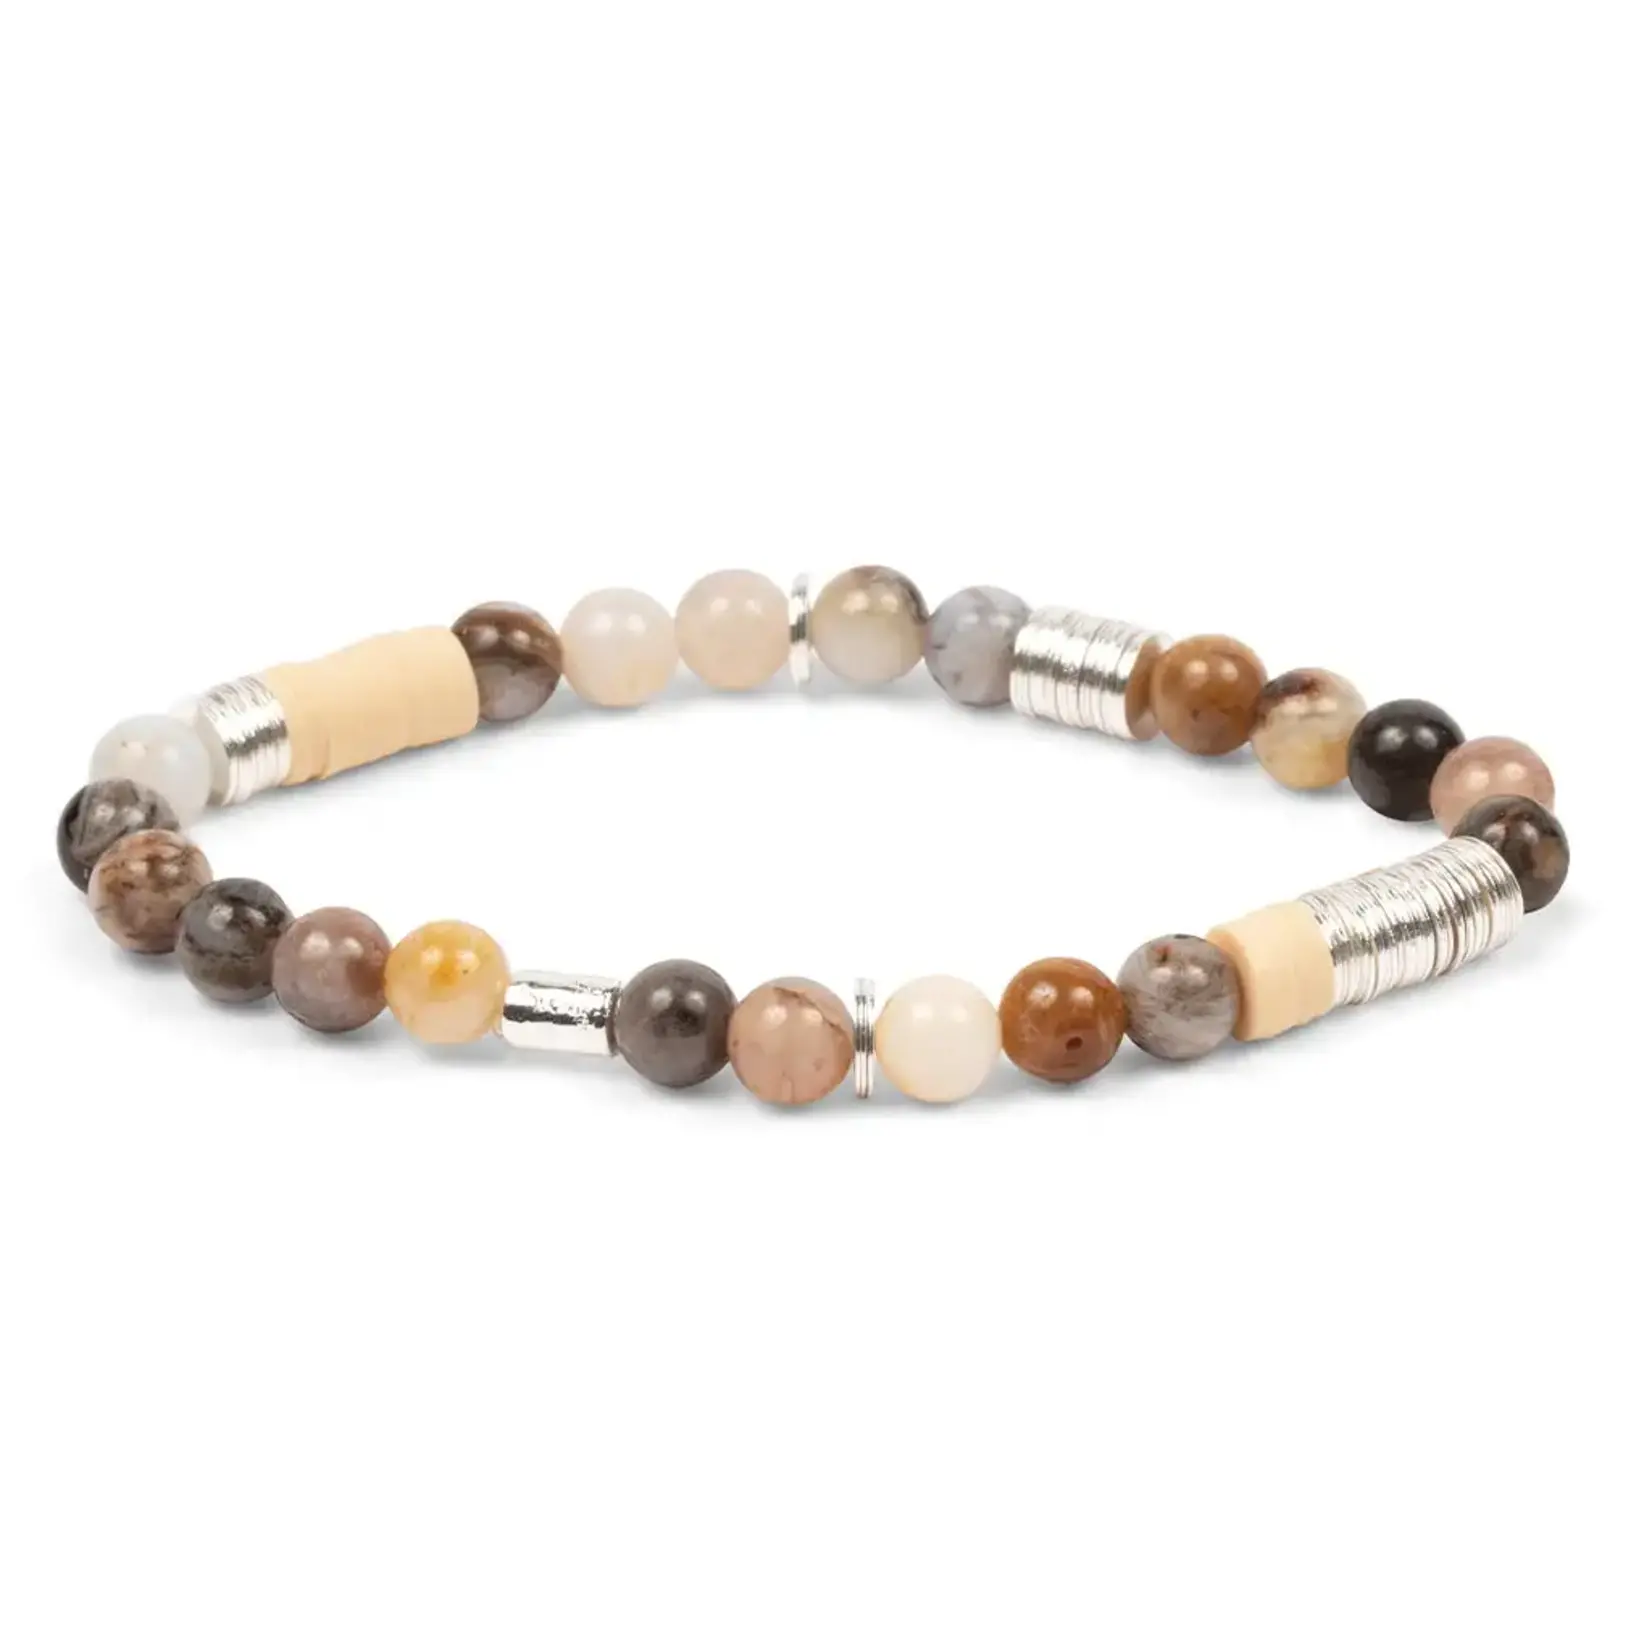 Scout Curated Wears Intermix Stone Stcking Bracelet